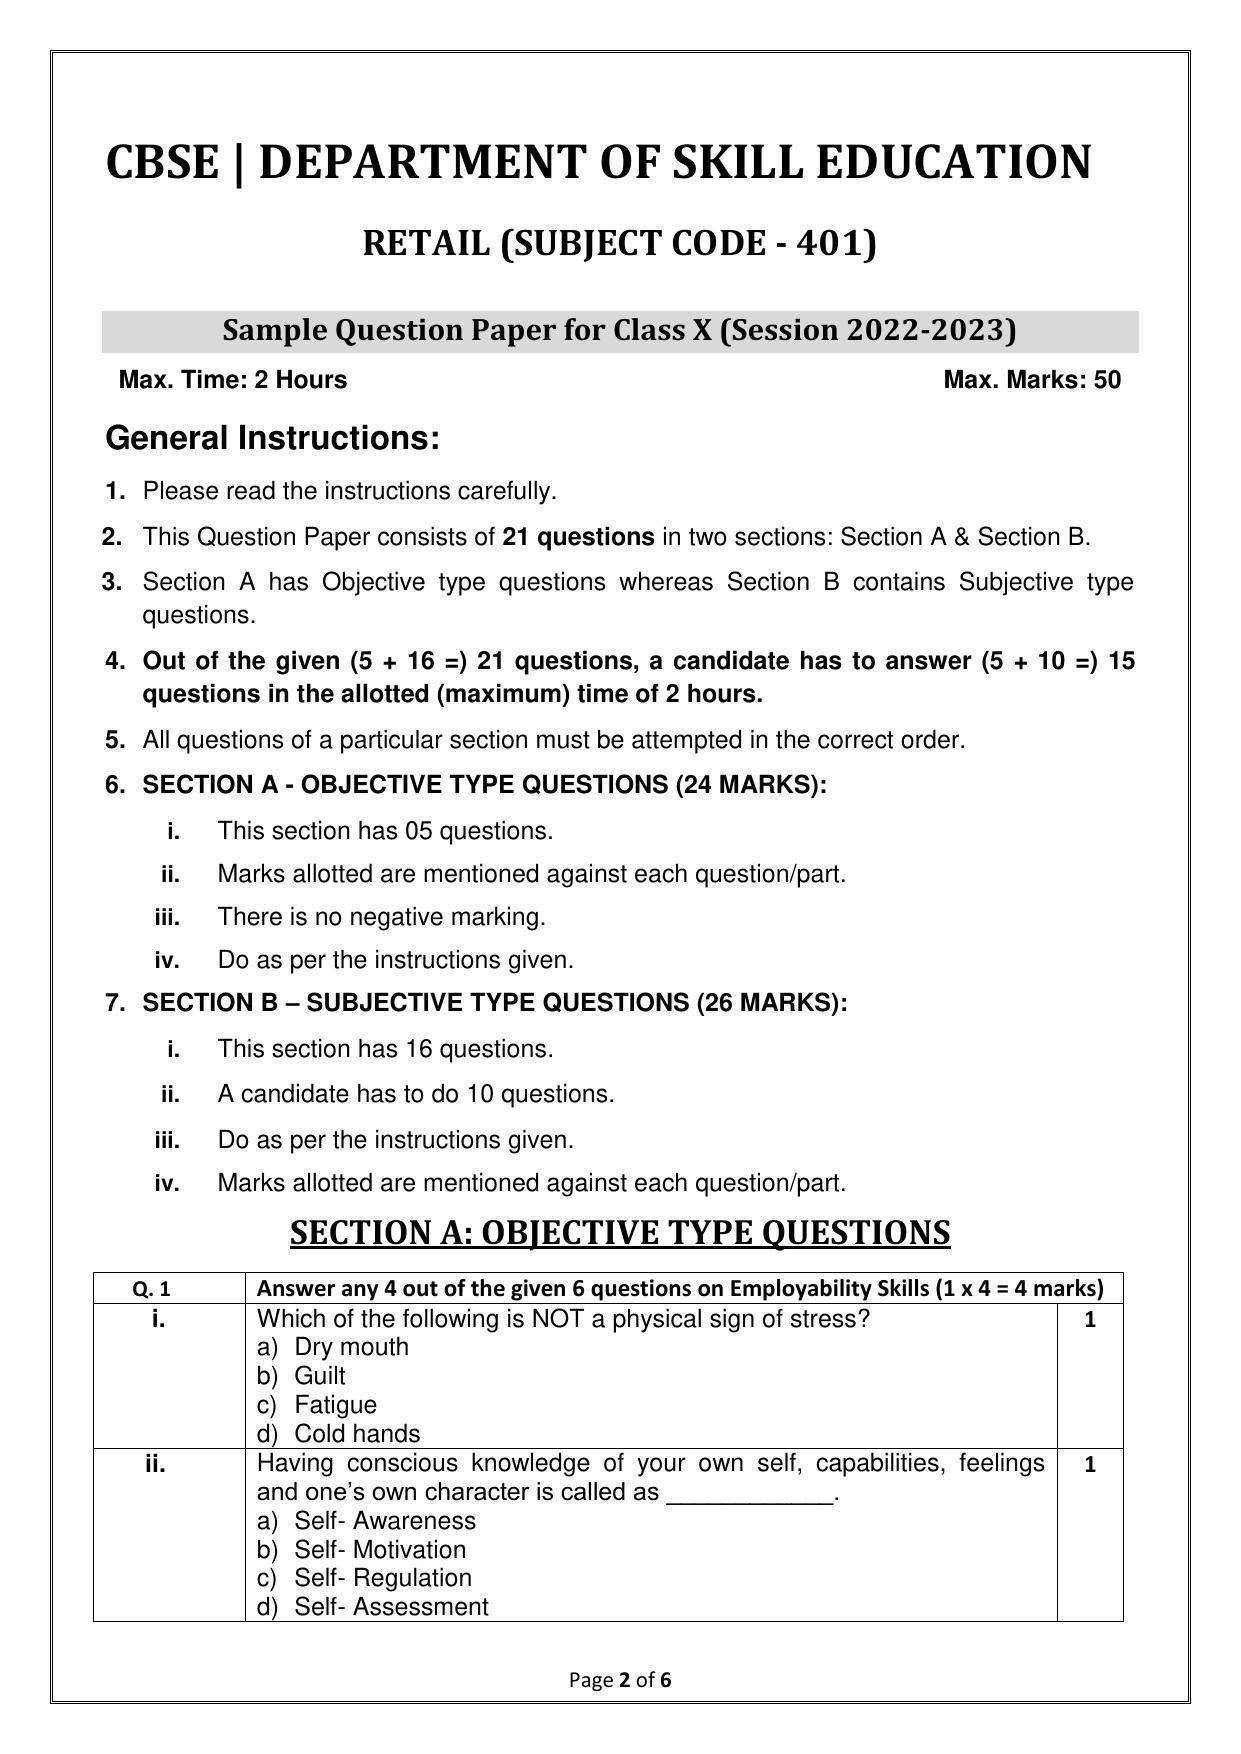 CBSE Class 10 Retail (Skill Education) Sample Papers 2023 - Page 2